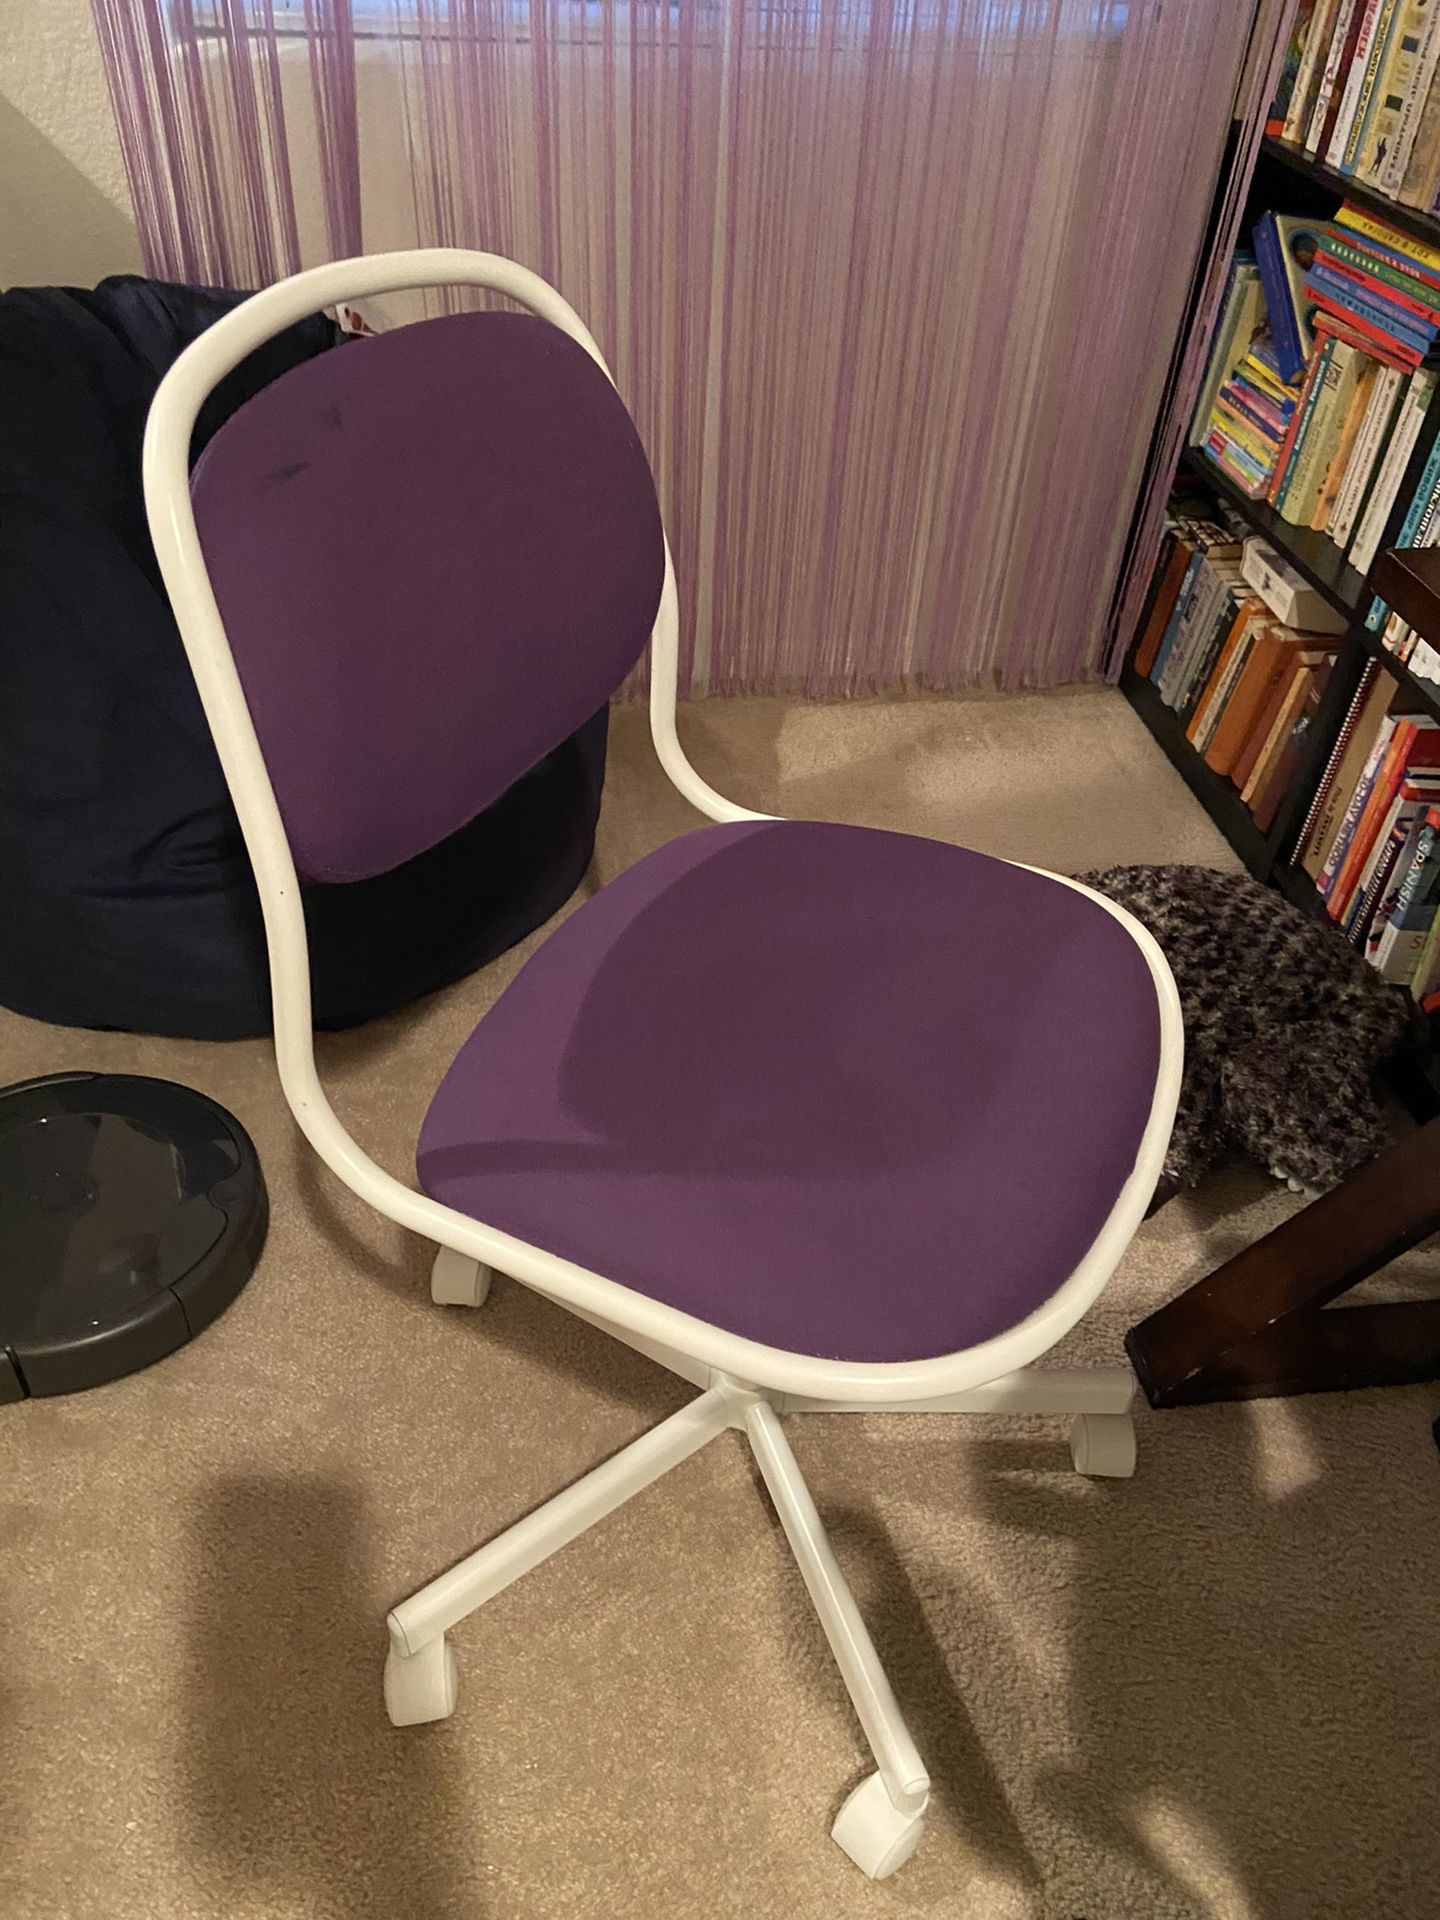 Kids learning chair